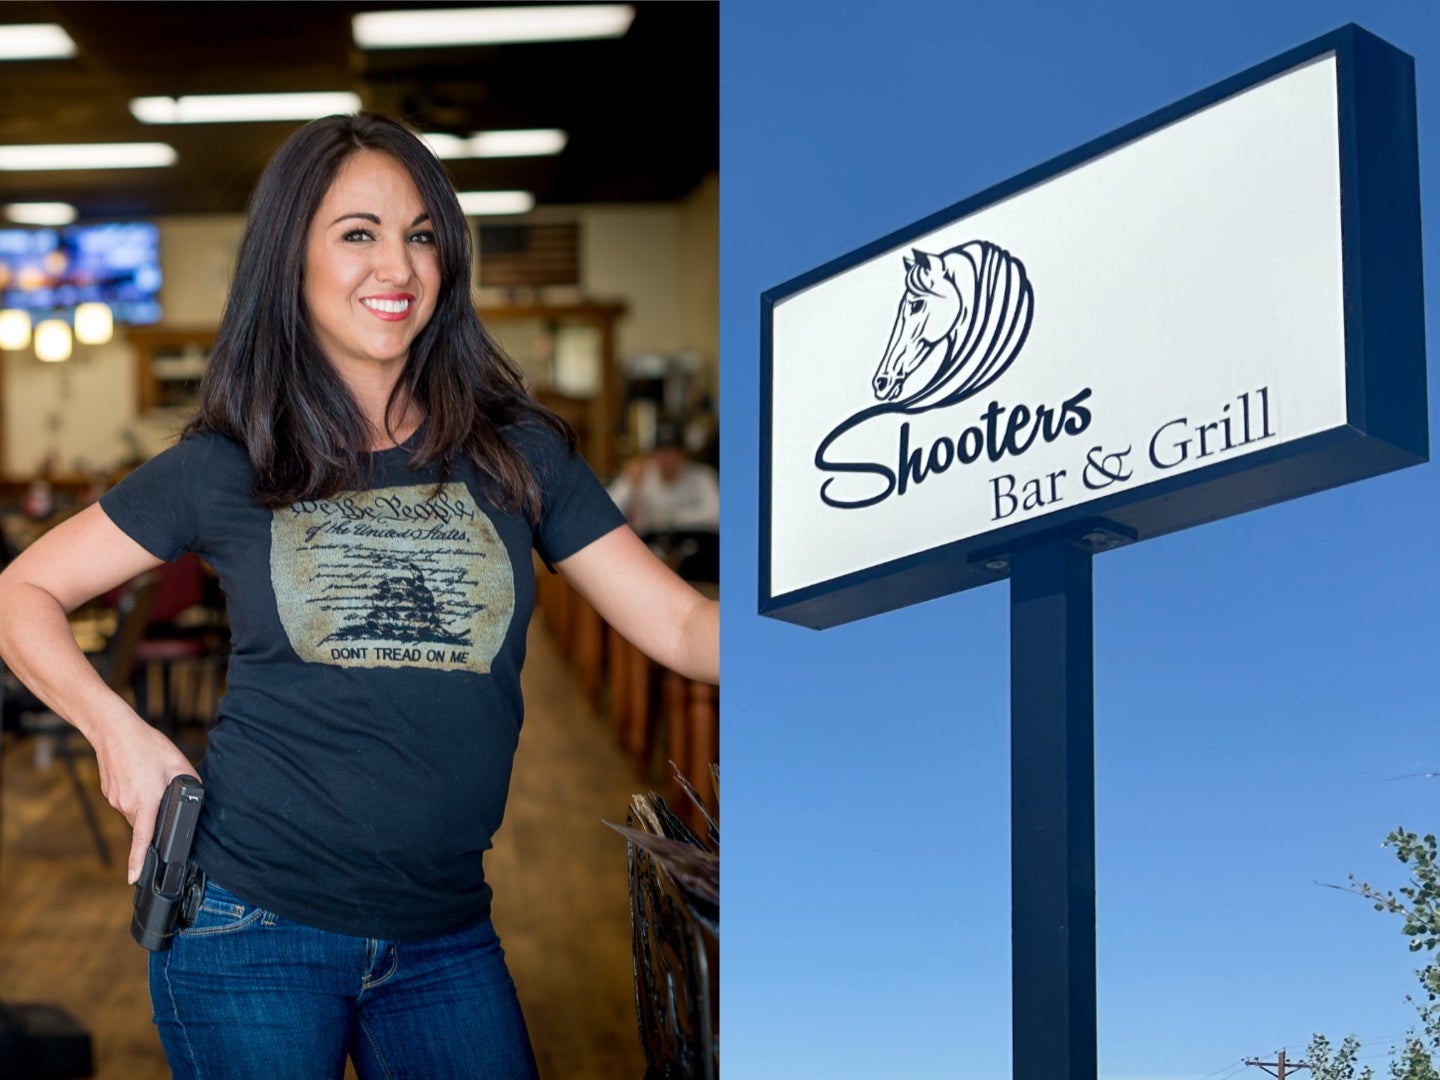 Part of Lauren Boebert’s fame came from her gun-themed restaurant Shooters Grill in Rifle, Colorado?— Boebert has left that district and closed her restaurant, but another Shooters exists in the distract she’s desperately hoping to win next week